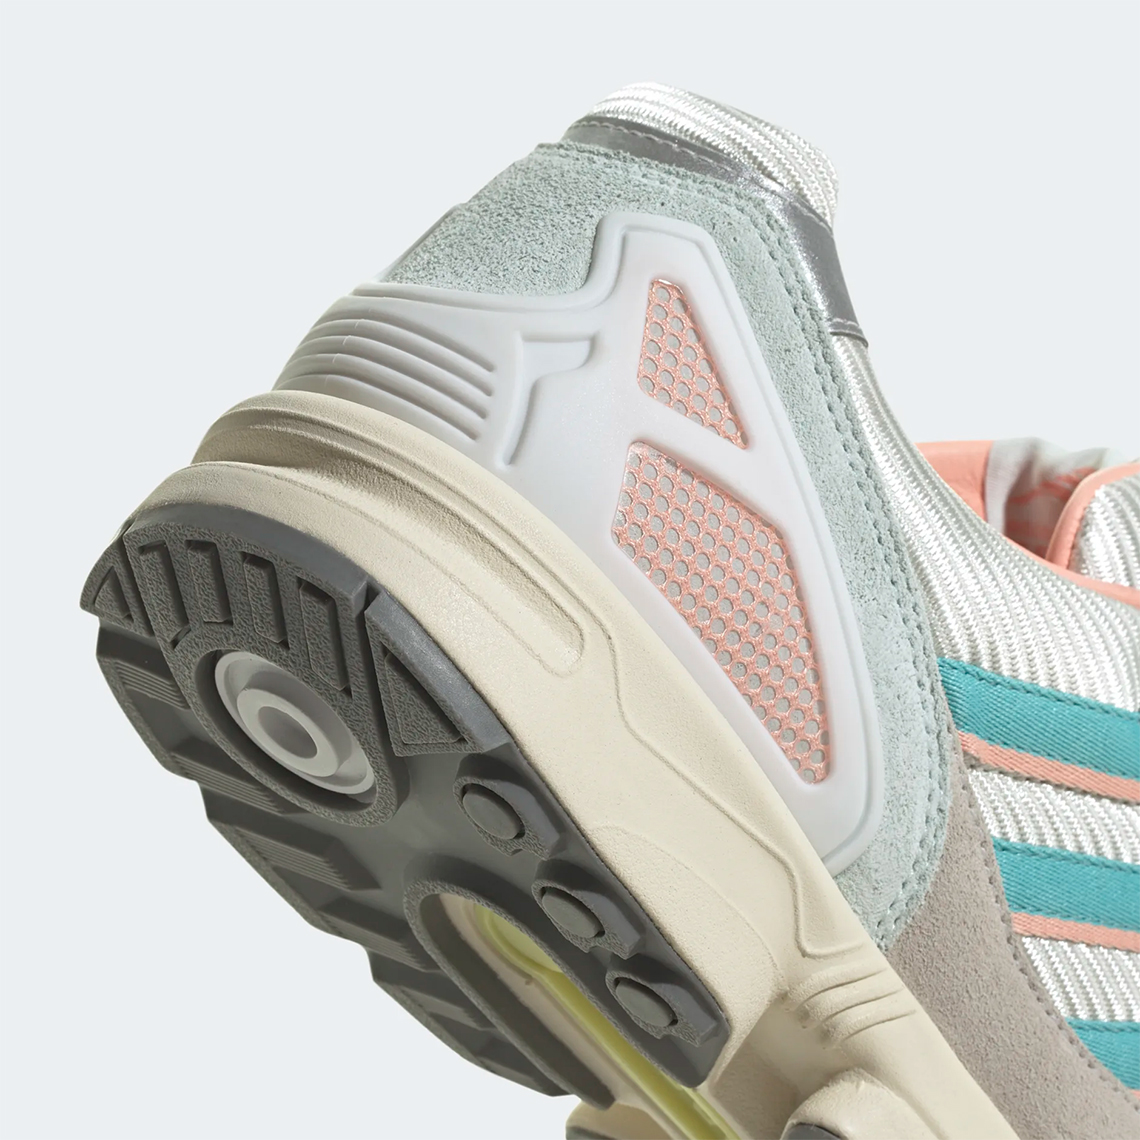 adidas ZX 8000 Ice Mint Trace Pink Cream White IF5382 